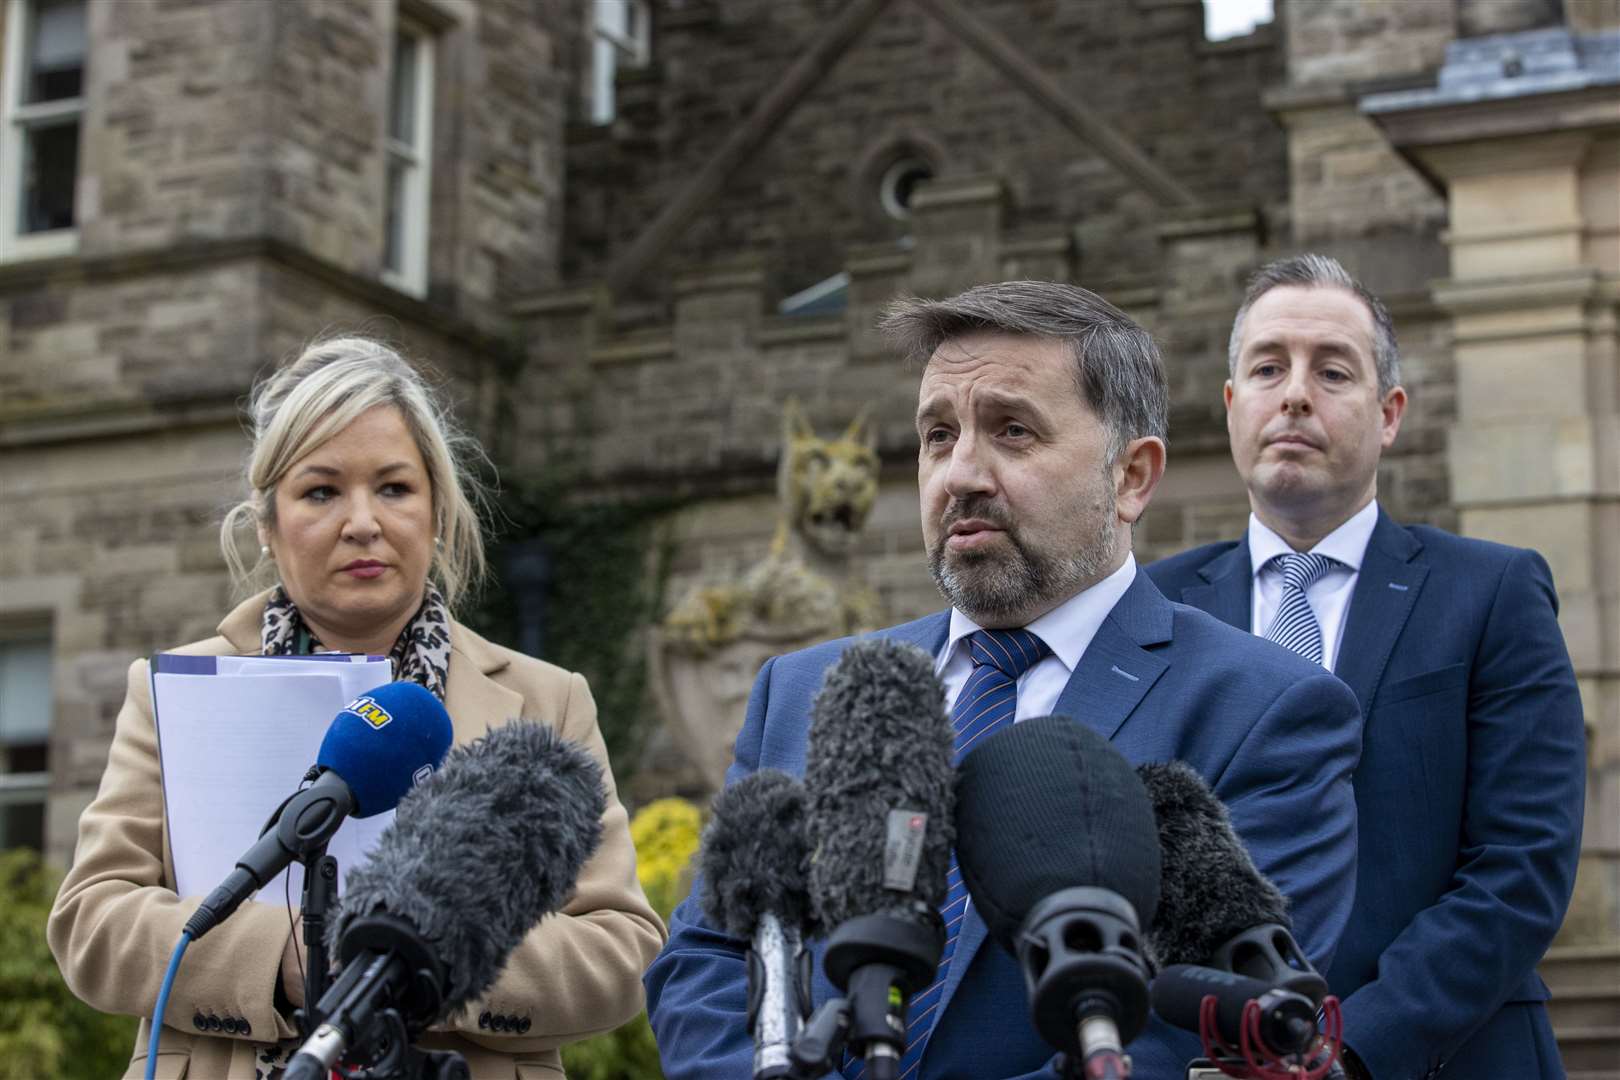 Northern Ireland Minister of Health Robin Swann (centre) speaks during a press conference at Stormont Castle in 2021, as he gave an update from the Northern Ireland Executive on new Covid measures as then deputy First Minister Michelle O’Neill (left) and then First Minister Paul Givan (right) look on (PA)